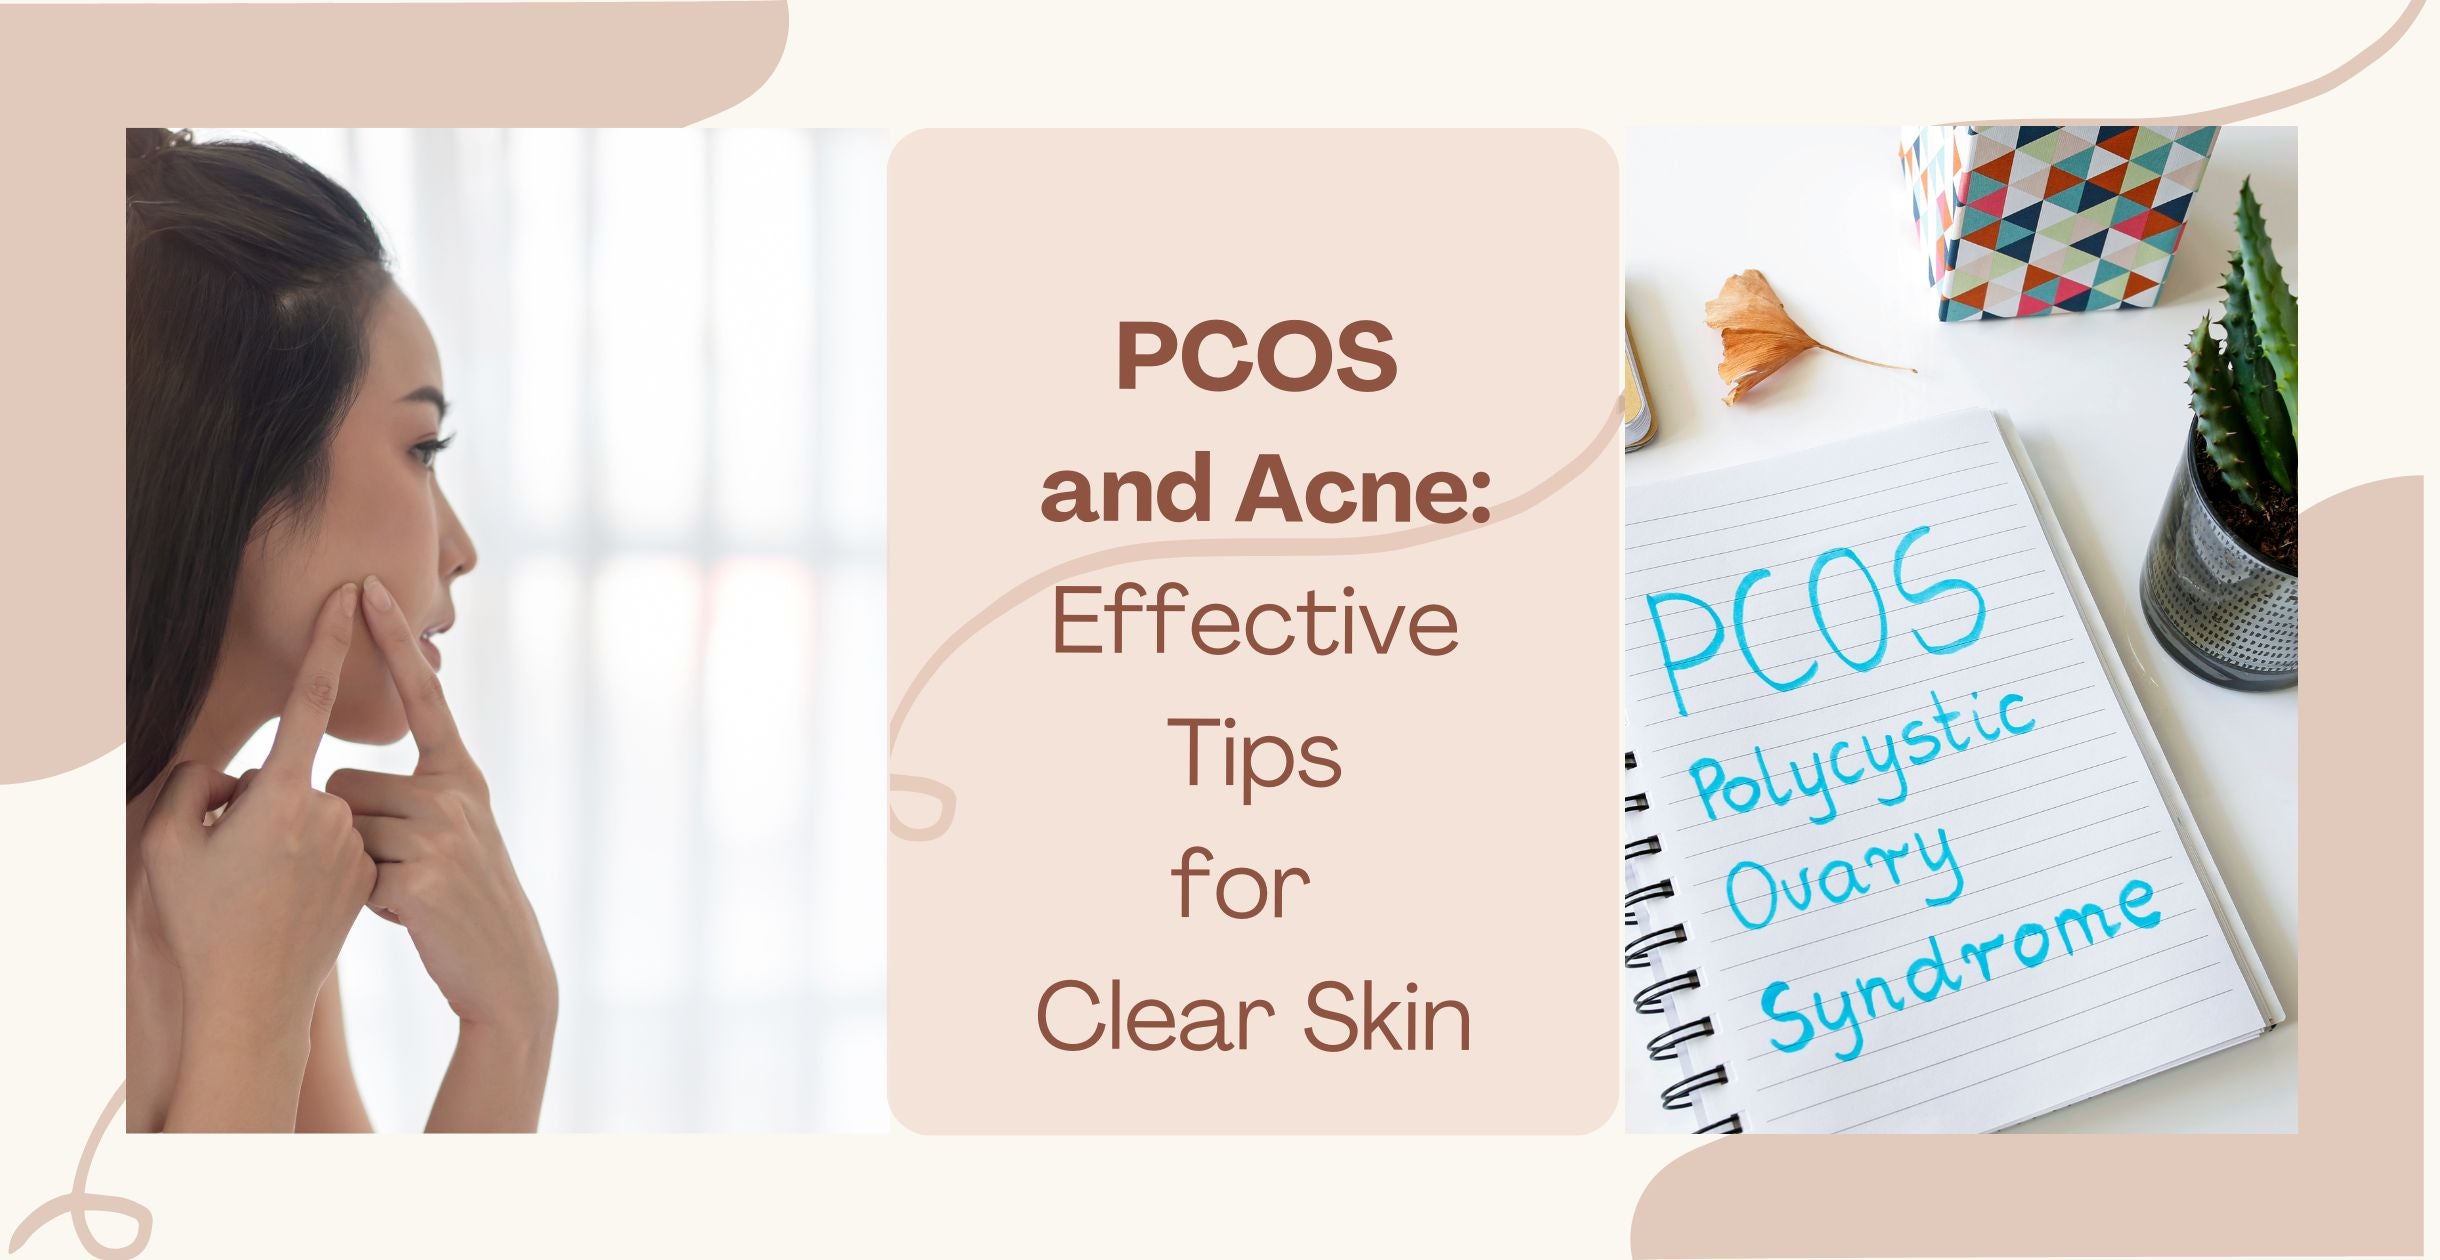 PCOS and Acne: Effective Tips for Clear Skin